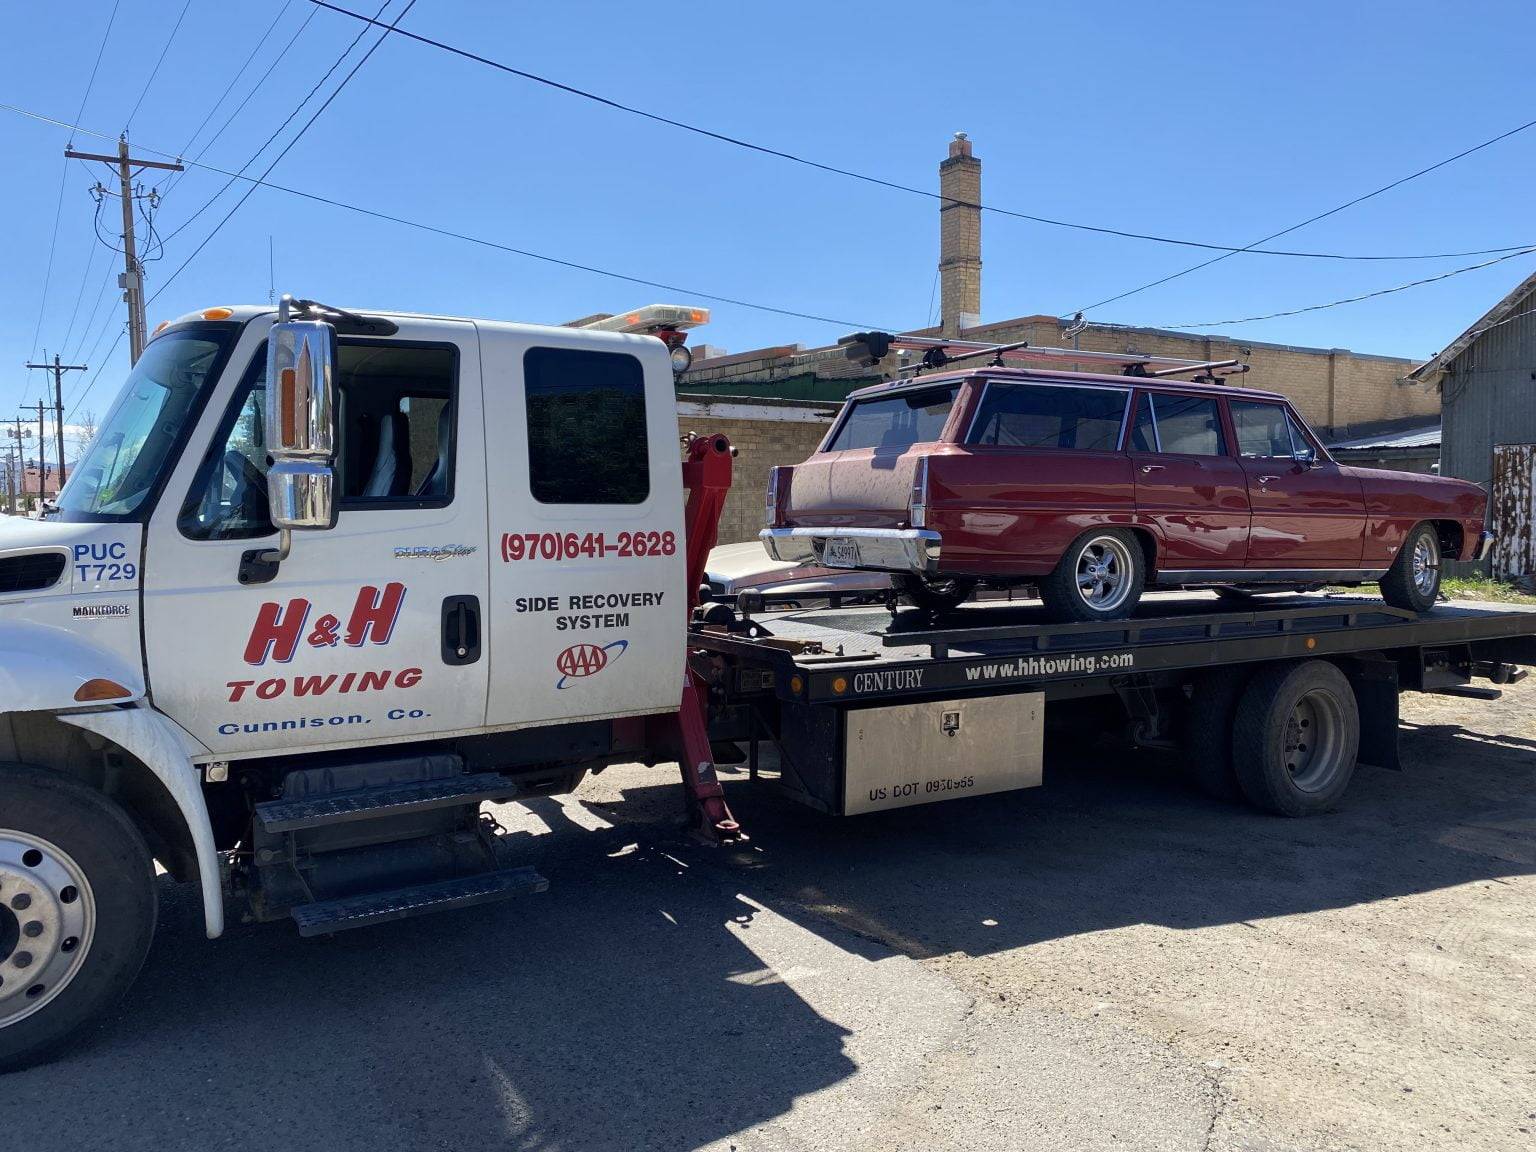 off-road recovery in Gunnison, CO